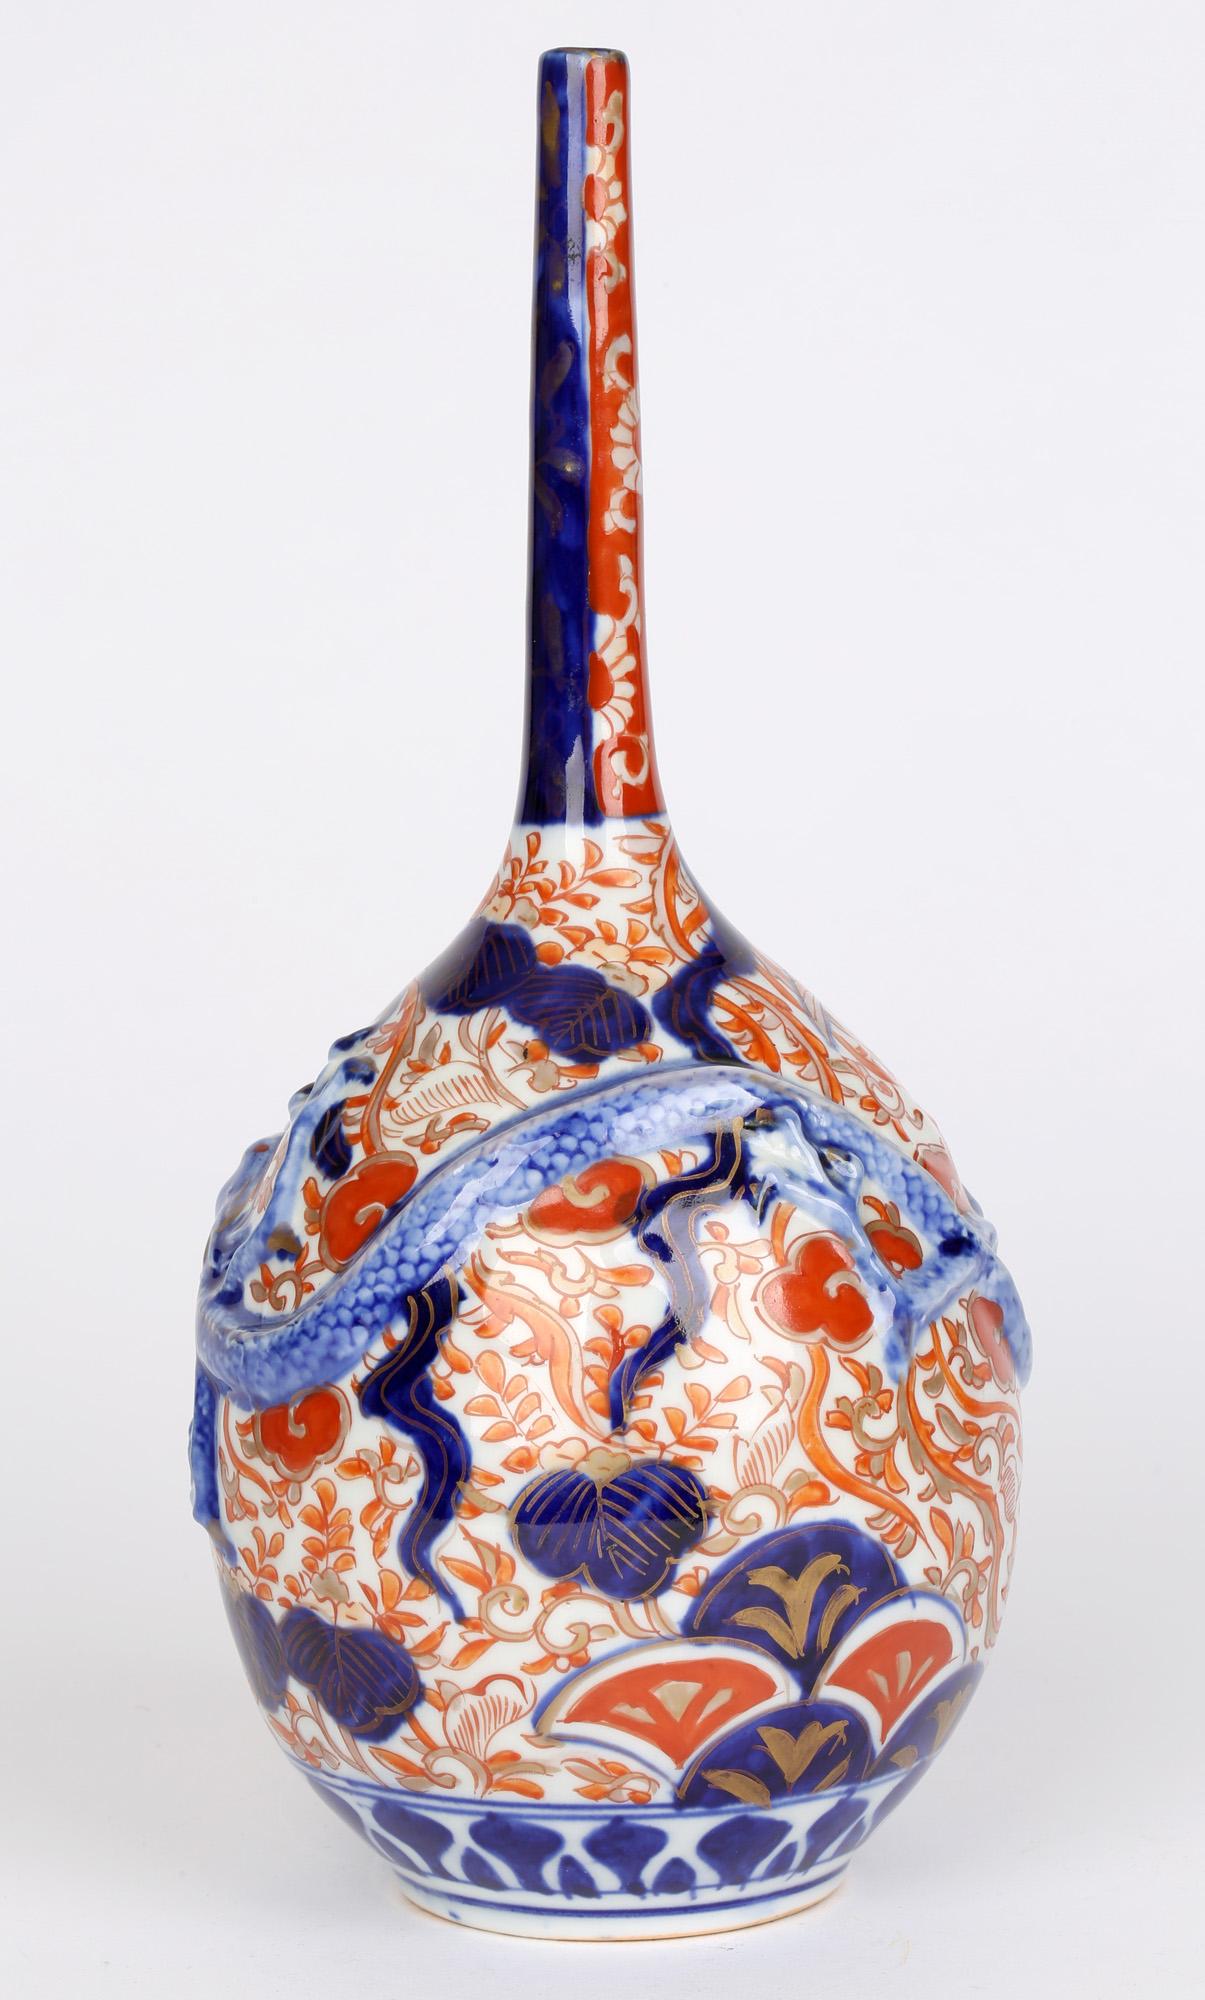 Japanese late Meiji Imari bottle shaped porcelain vase applied with a scrolling dragon dating from between 1868 and 1912. The vase stands on a rounded narrow foot with a rounded egg-shaped body and a very slender tall neck. The body of the vase is